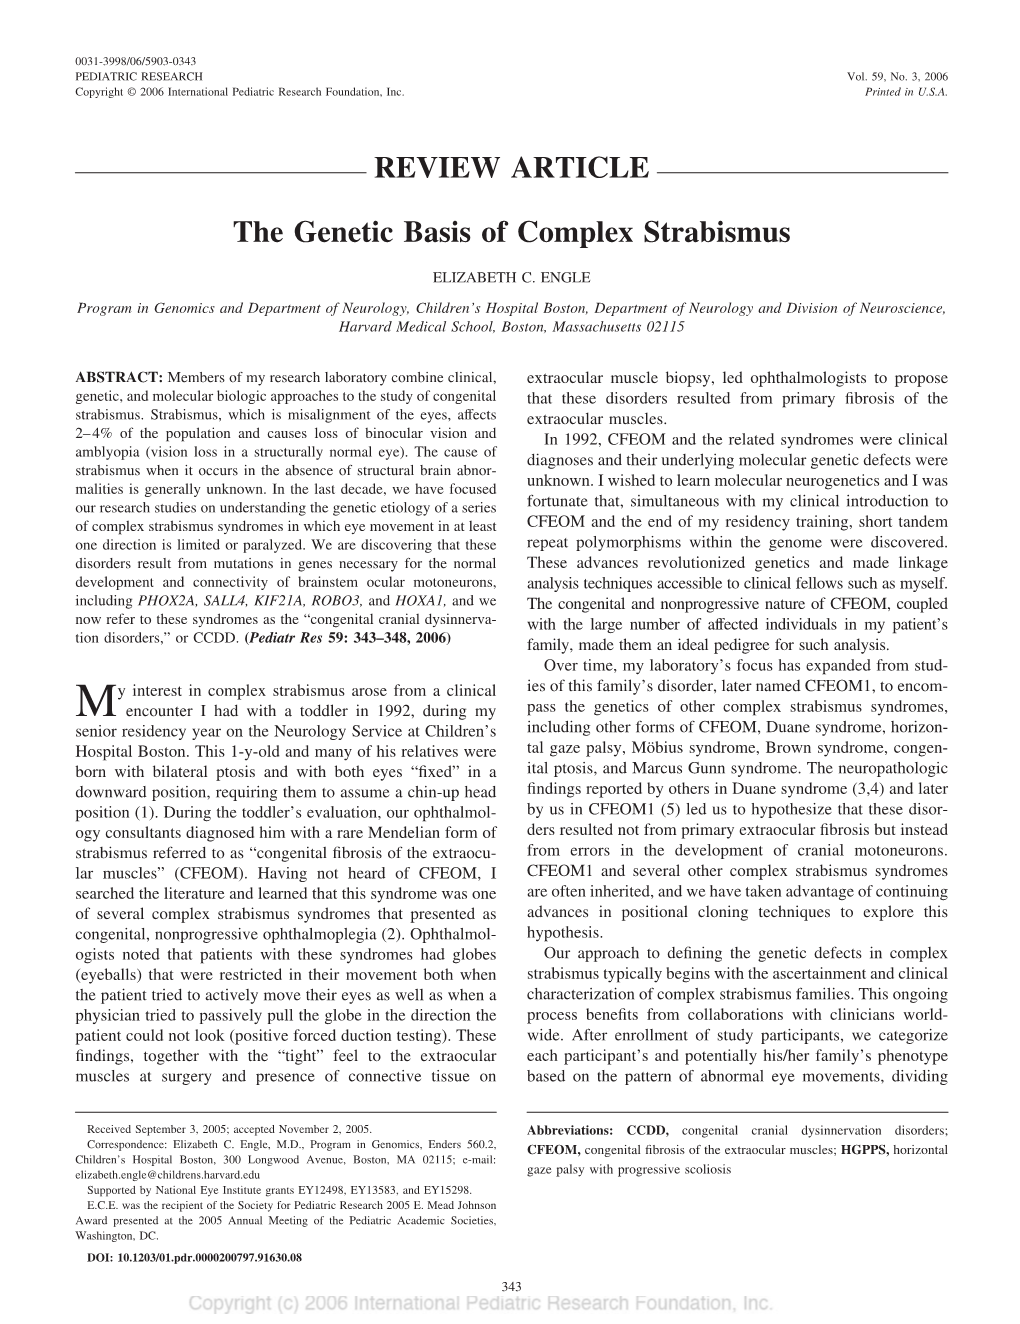 REVIEW ARTICLE the Genetic Basis of Complex Strabismus